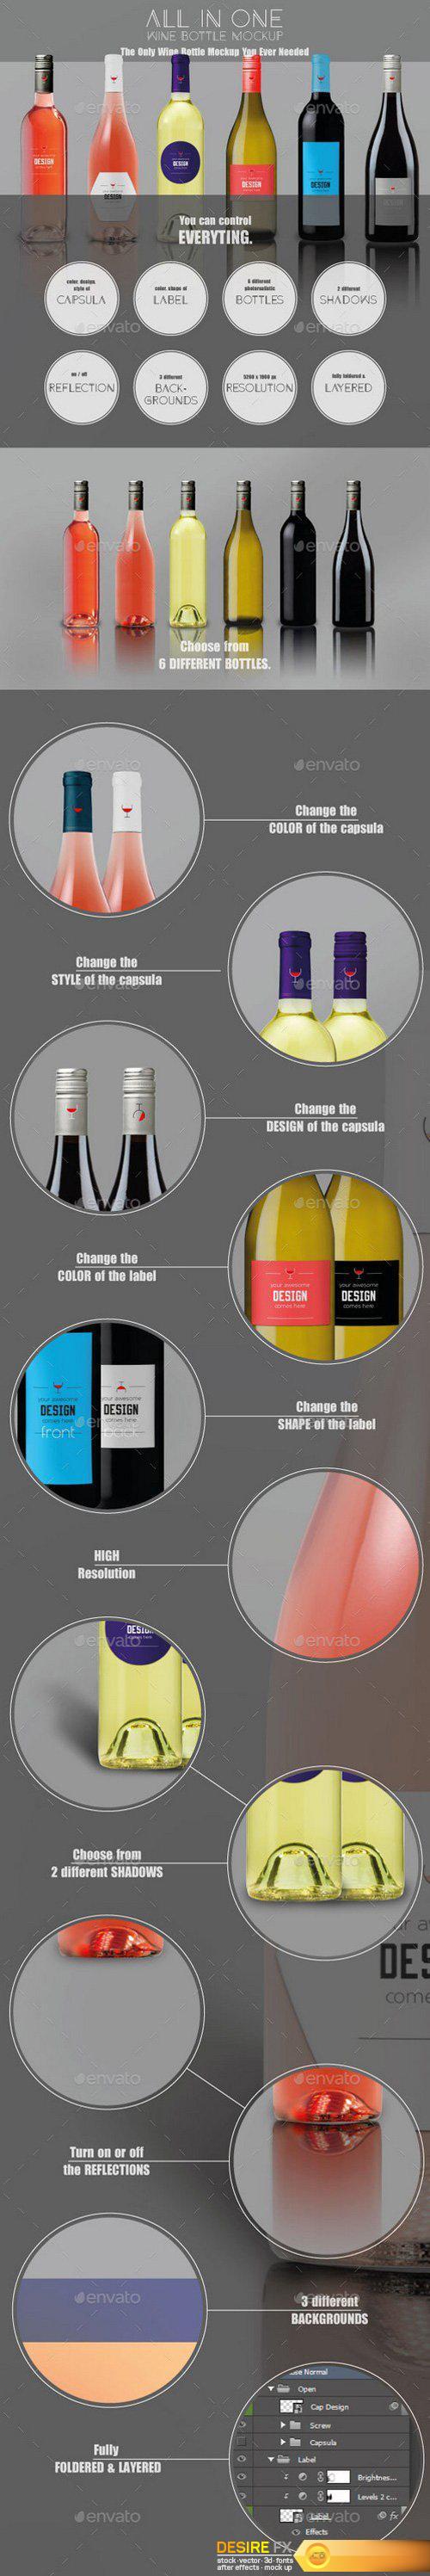 Graphicriver - All-In-One Wine Bottle MockUp 11744652